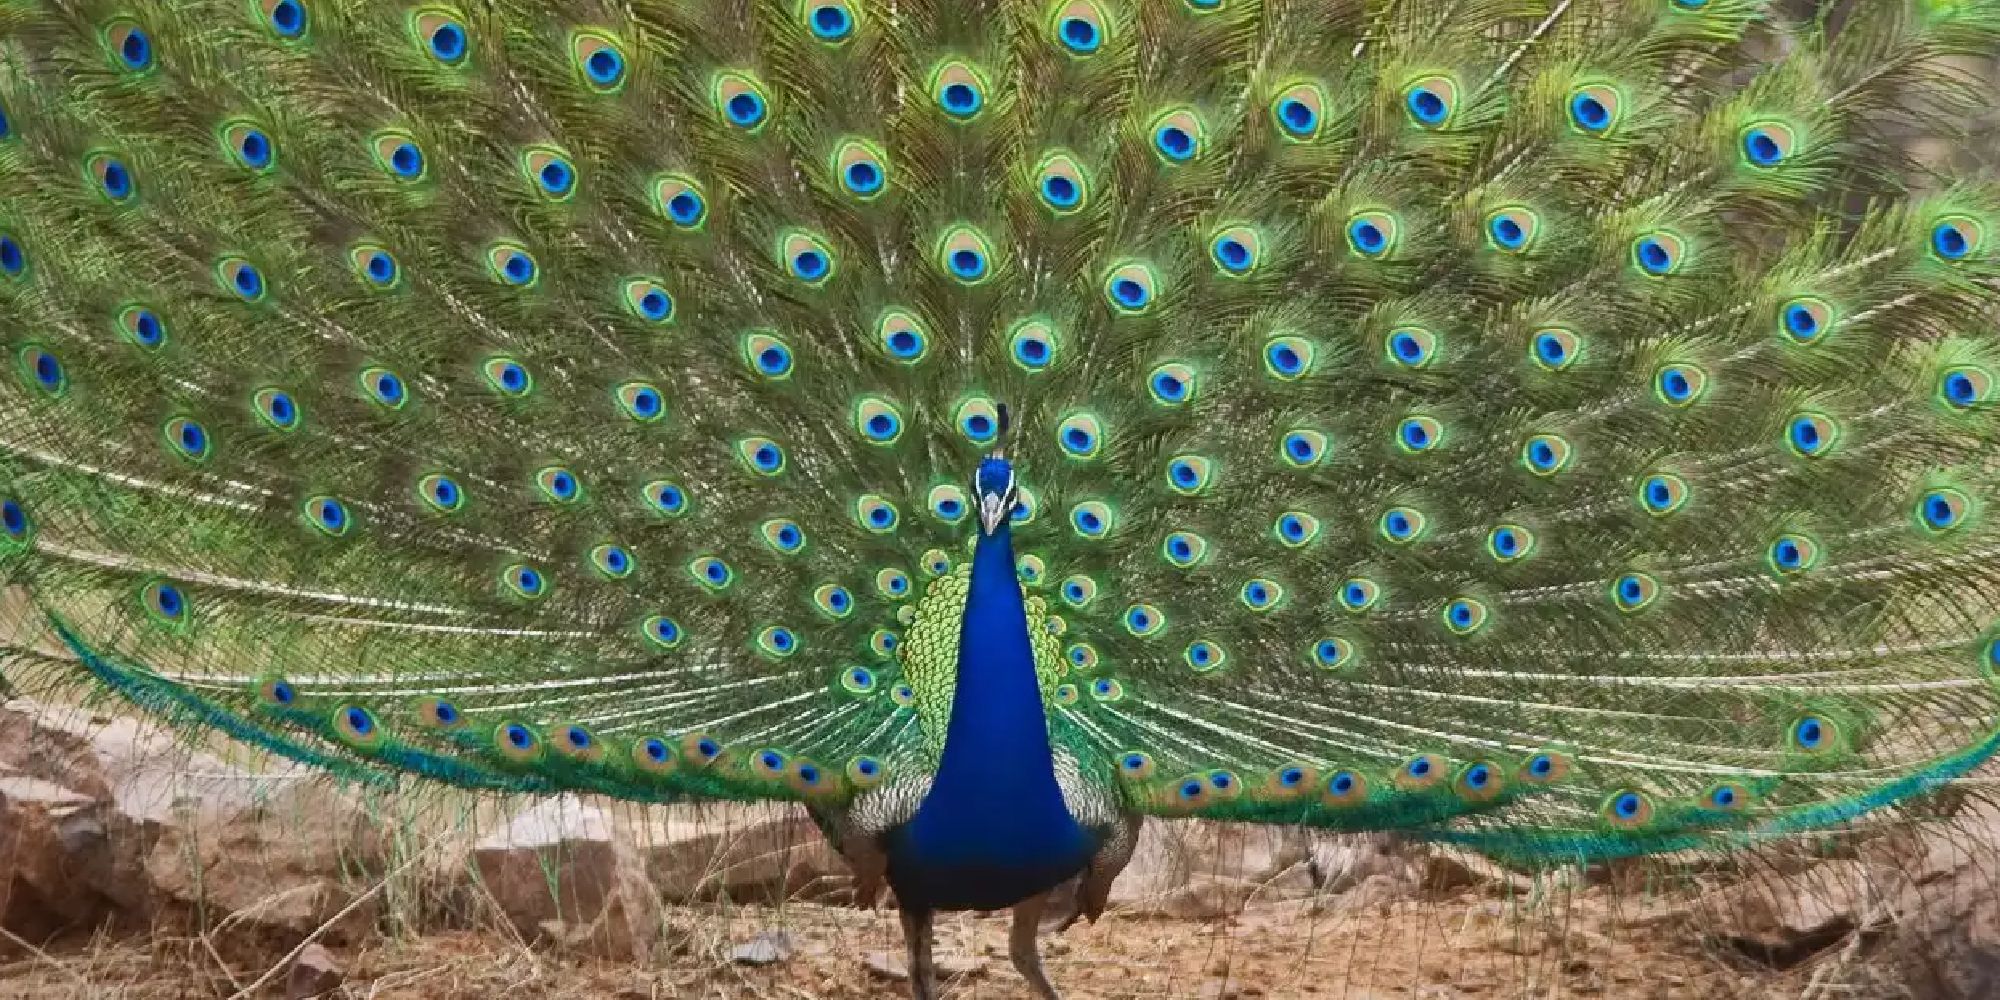 A peacock showing off its plumes